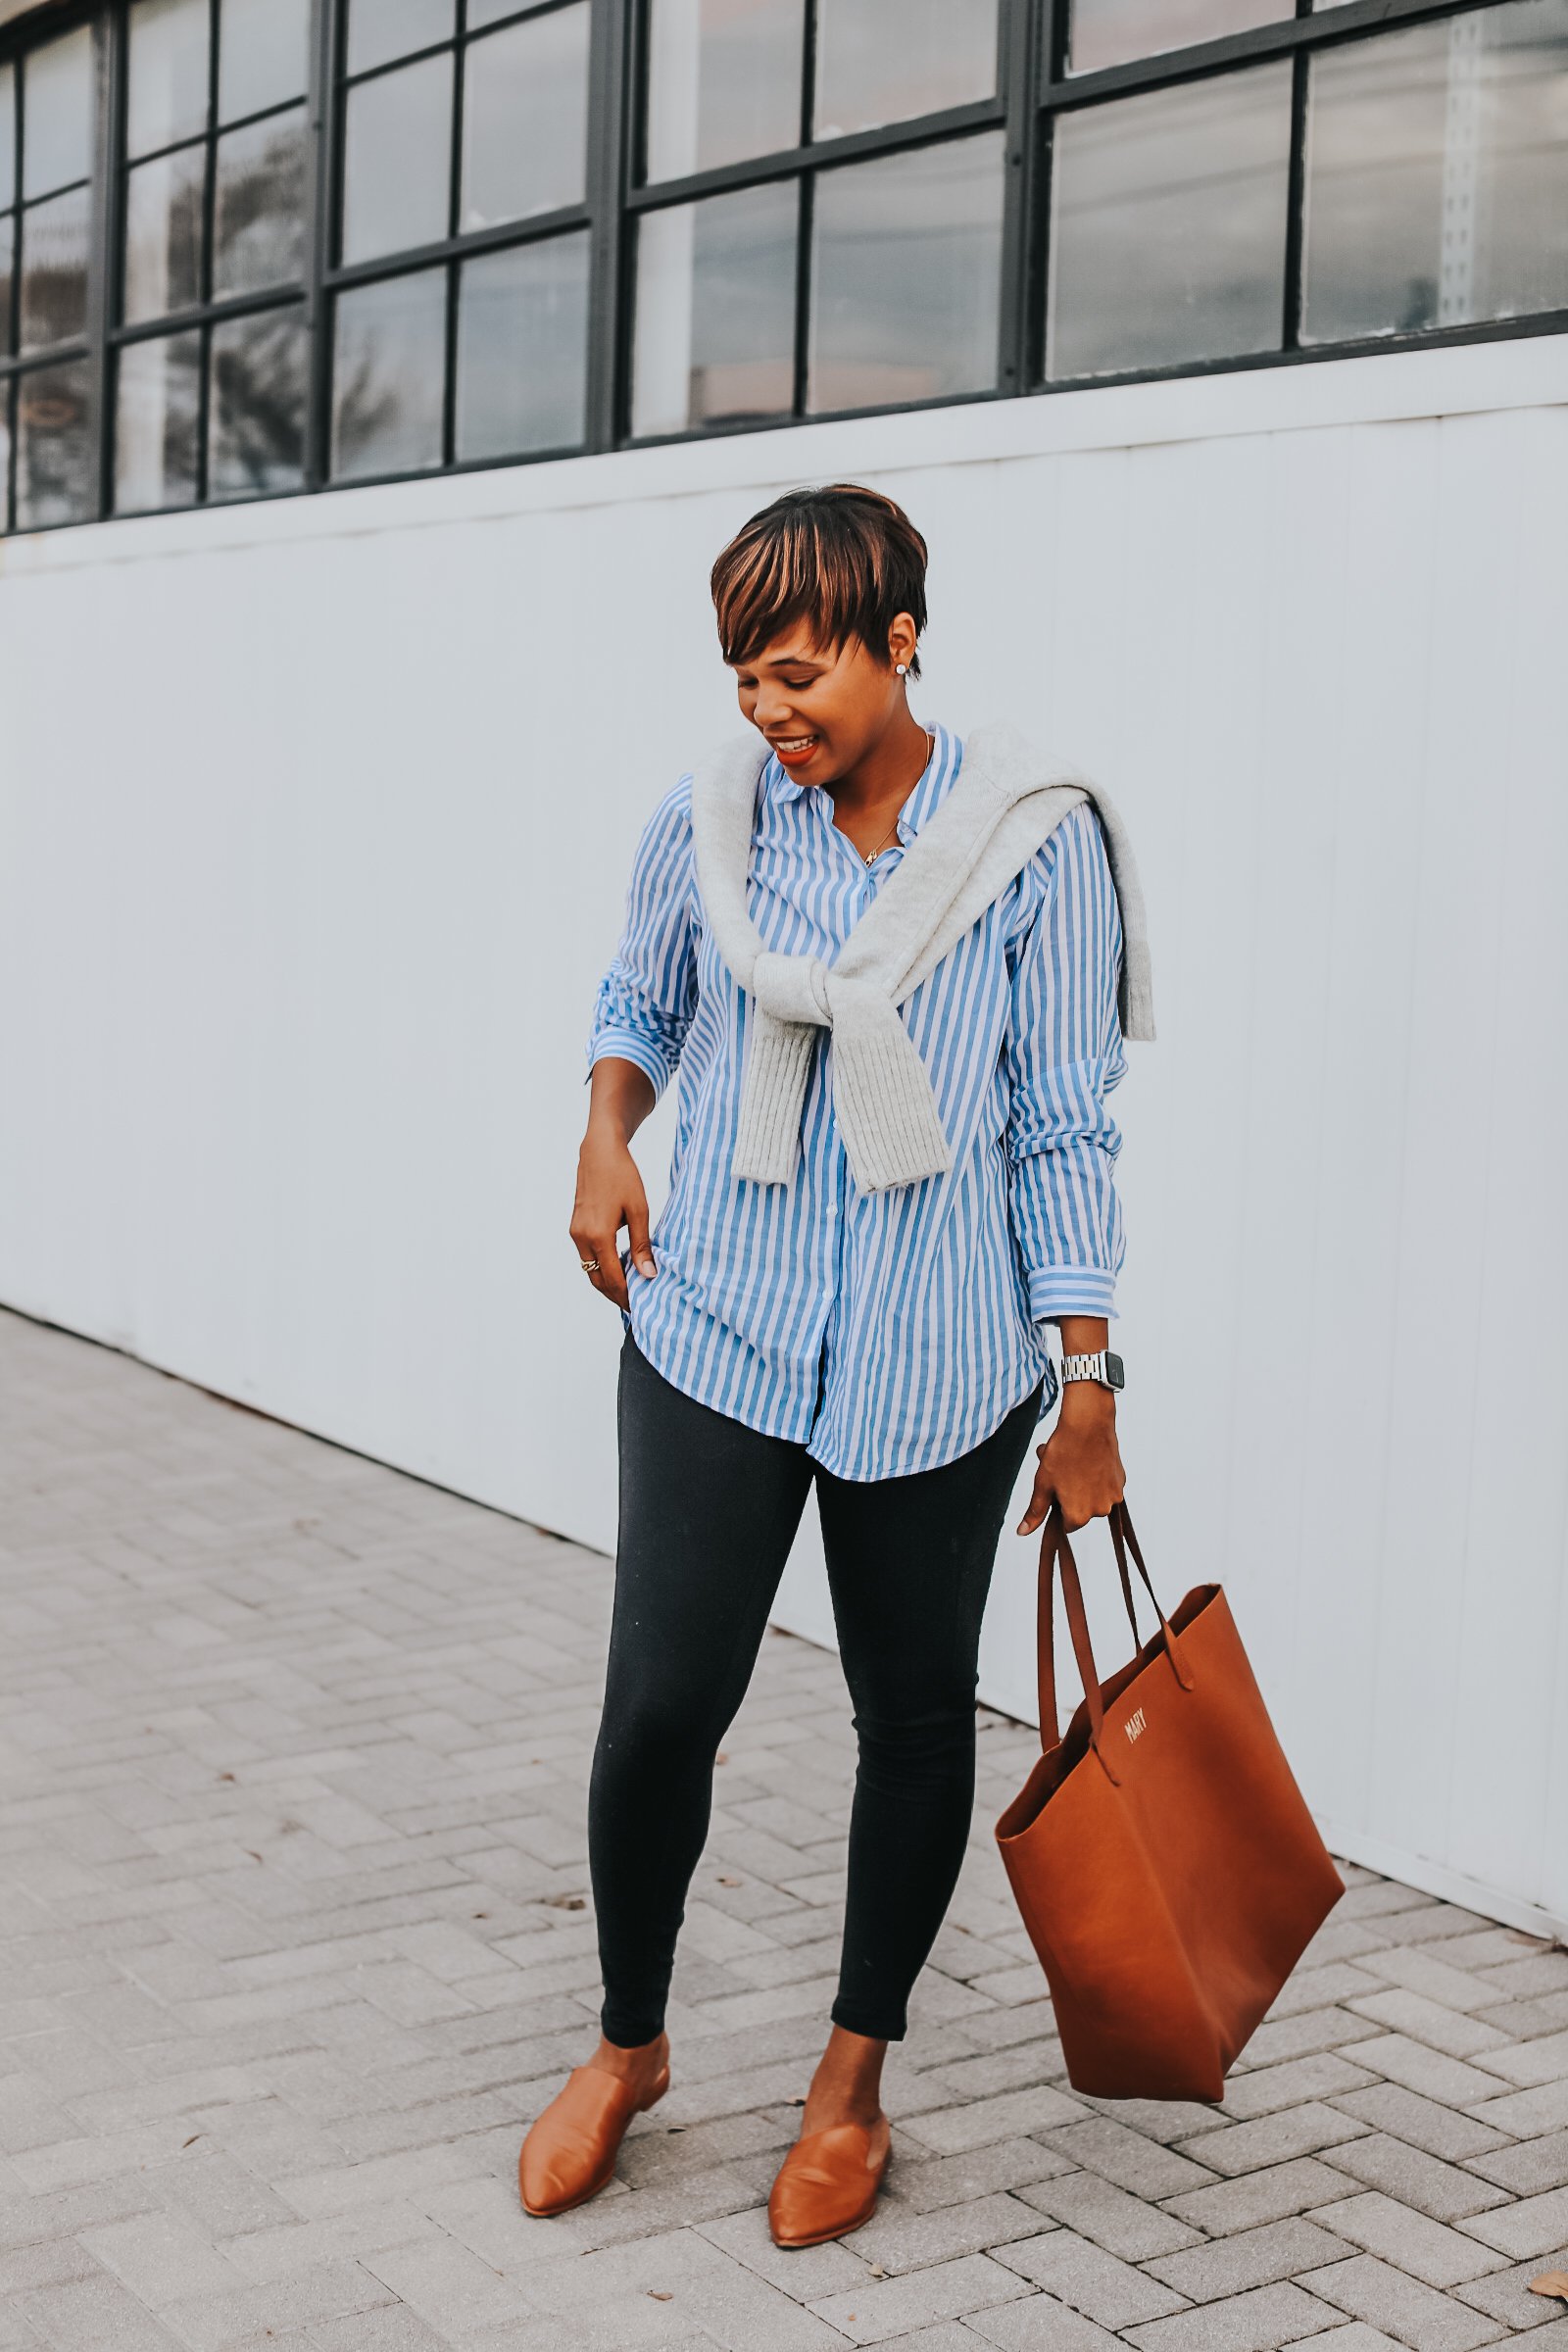 Mary's Little Way in A Gray Knotted Sweater, a Blue and White Striped Boyfriend Shirt, Tan Mules, and Tan Tote bag